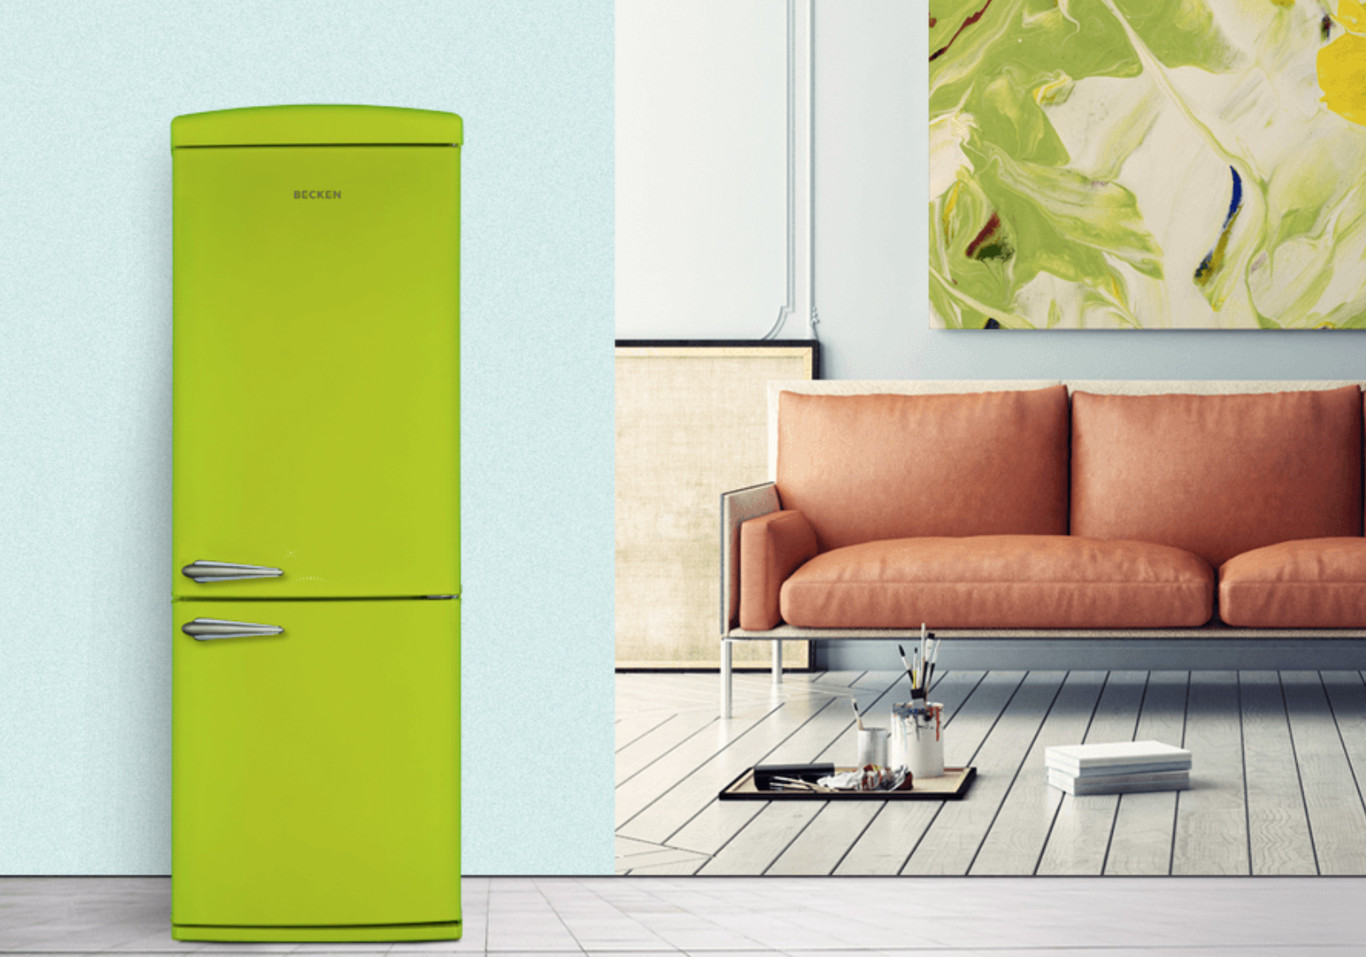 Do you like retro? These Becken refrigerators are an alternative to give a vintage touch in the kitchen